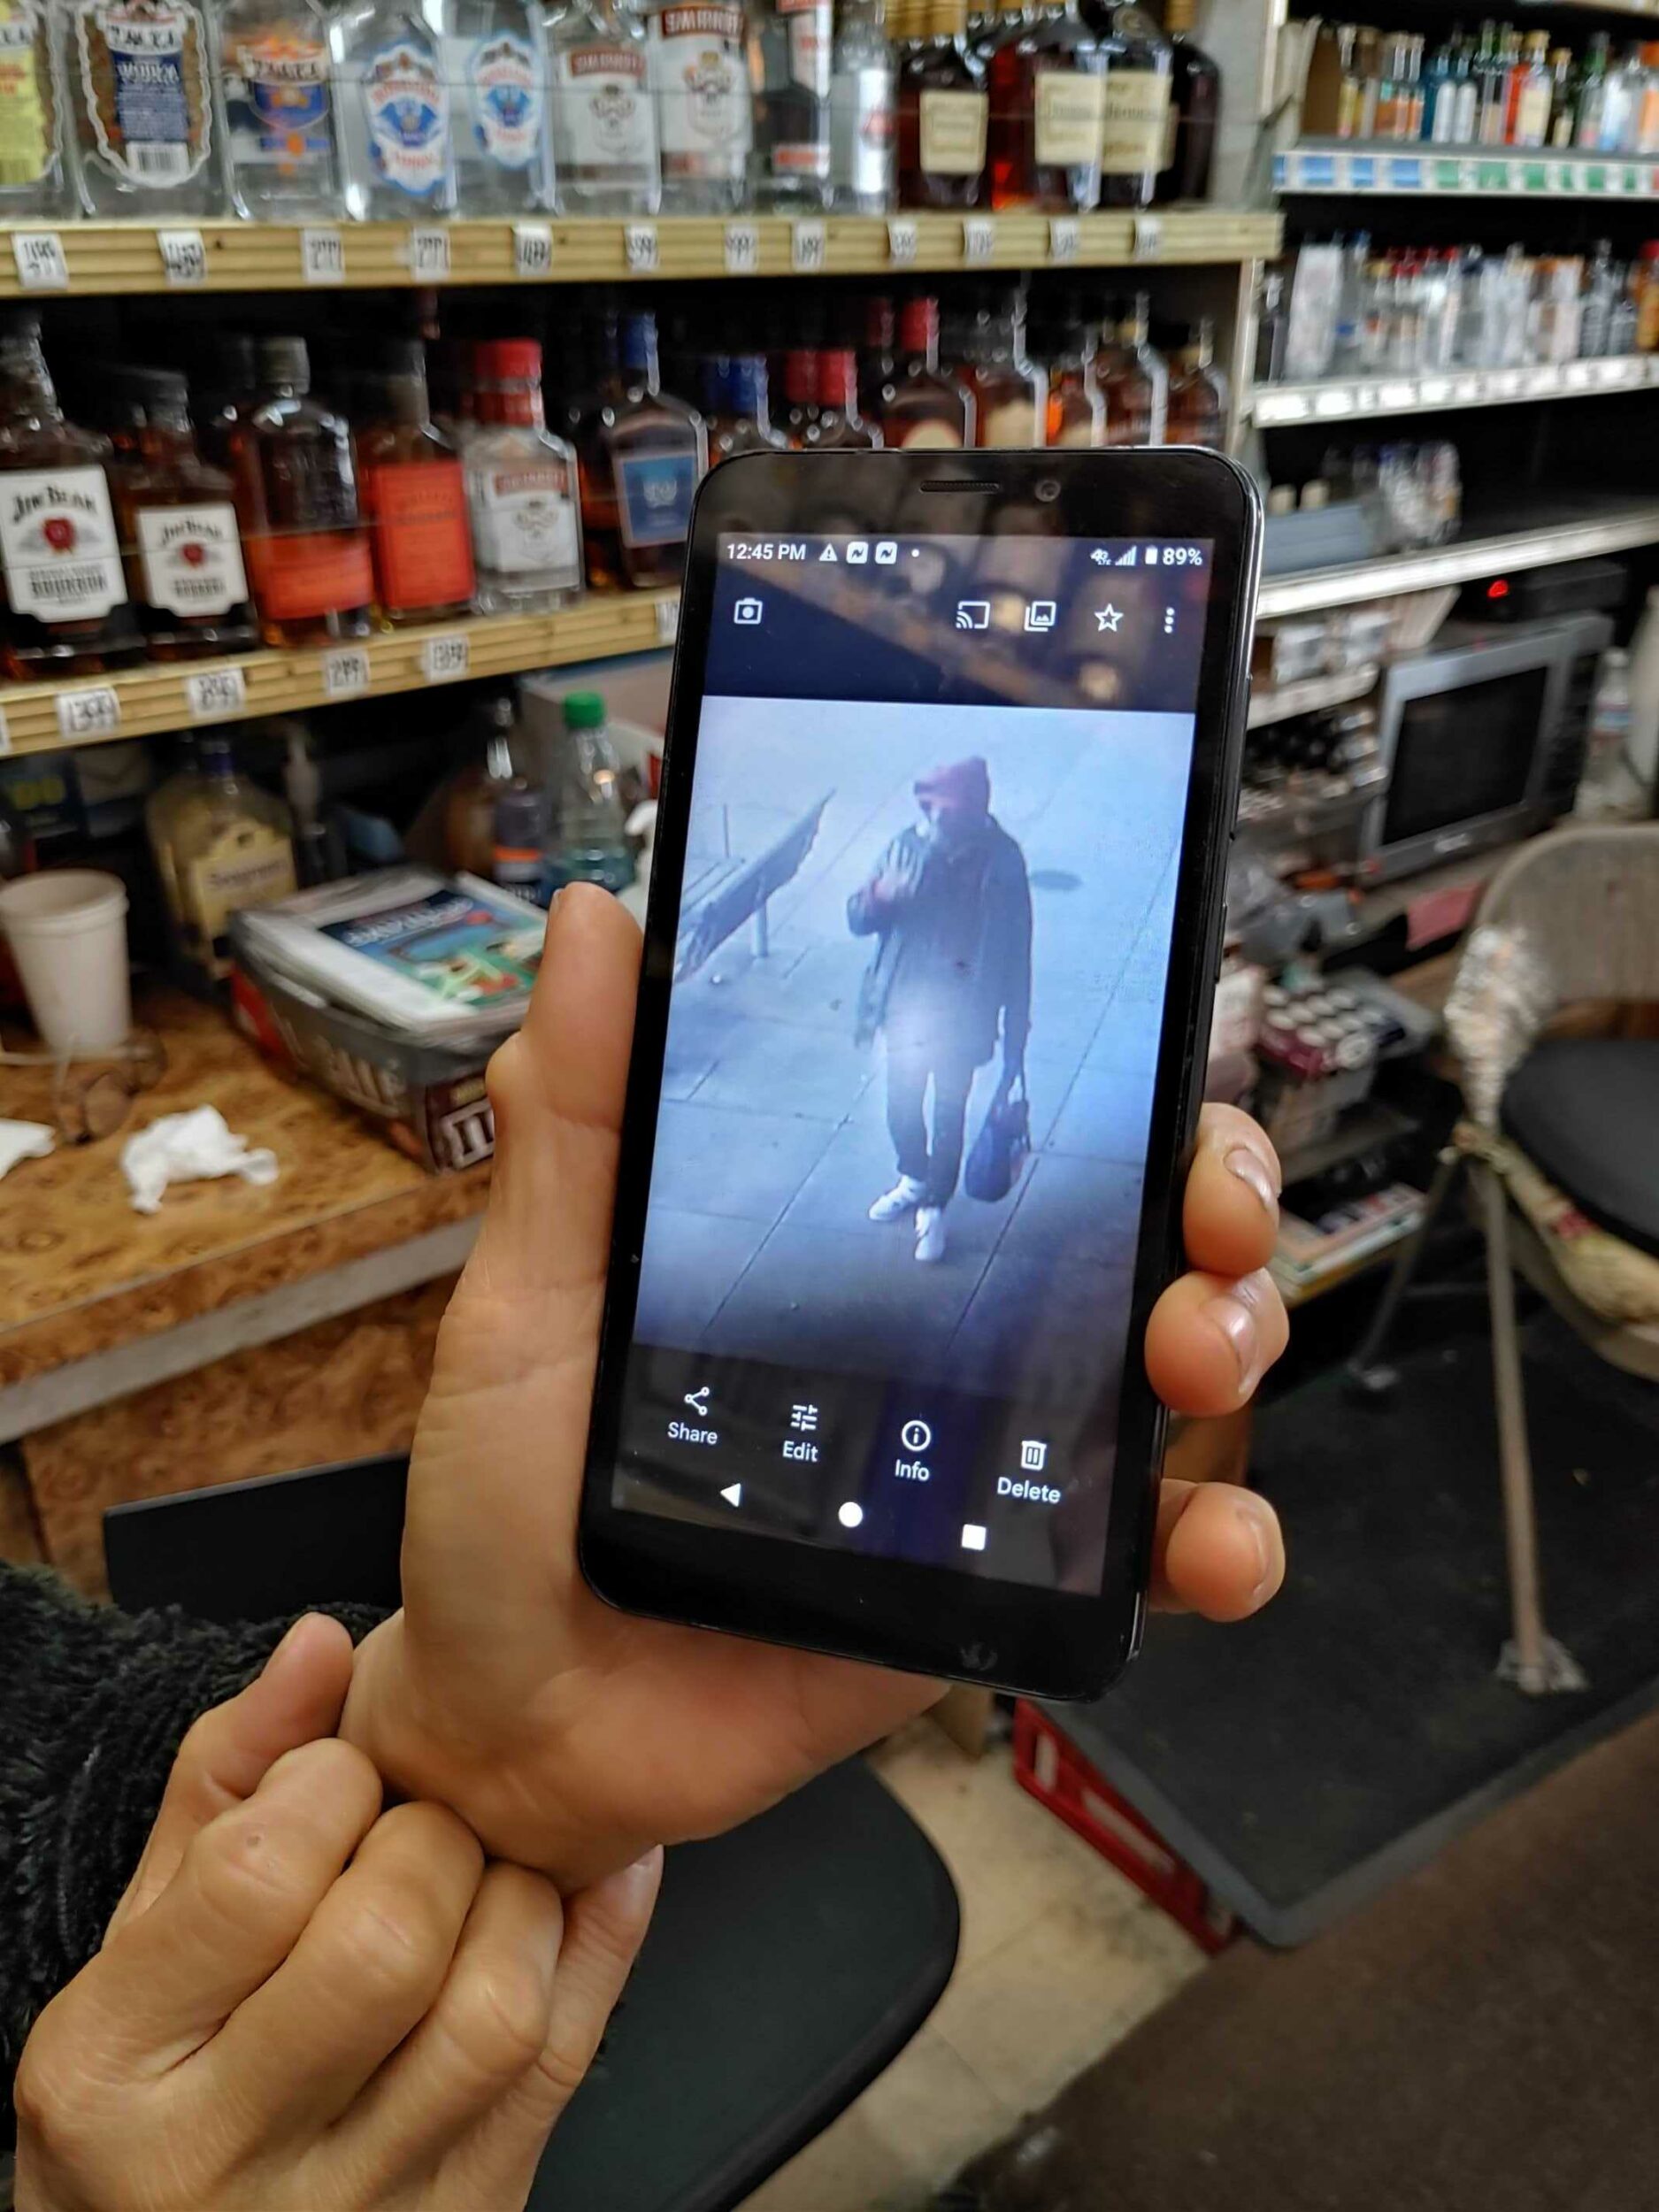 A hand holds a phone displaying a CCTV image of a person, with shelves of bottles in the blurry background.